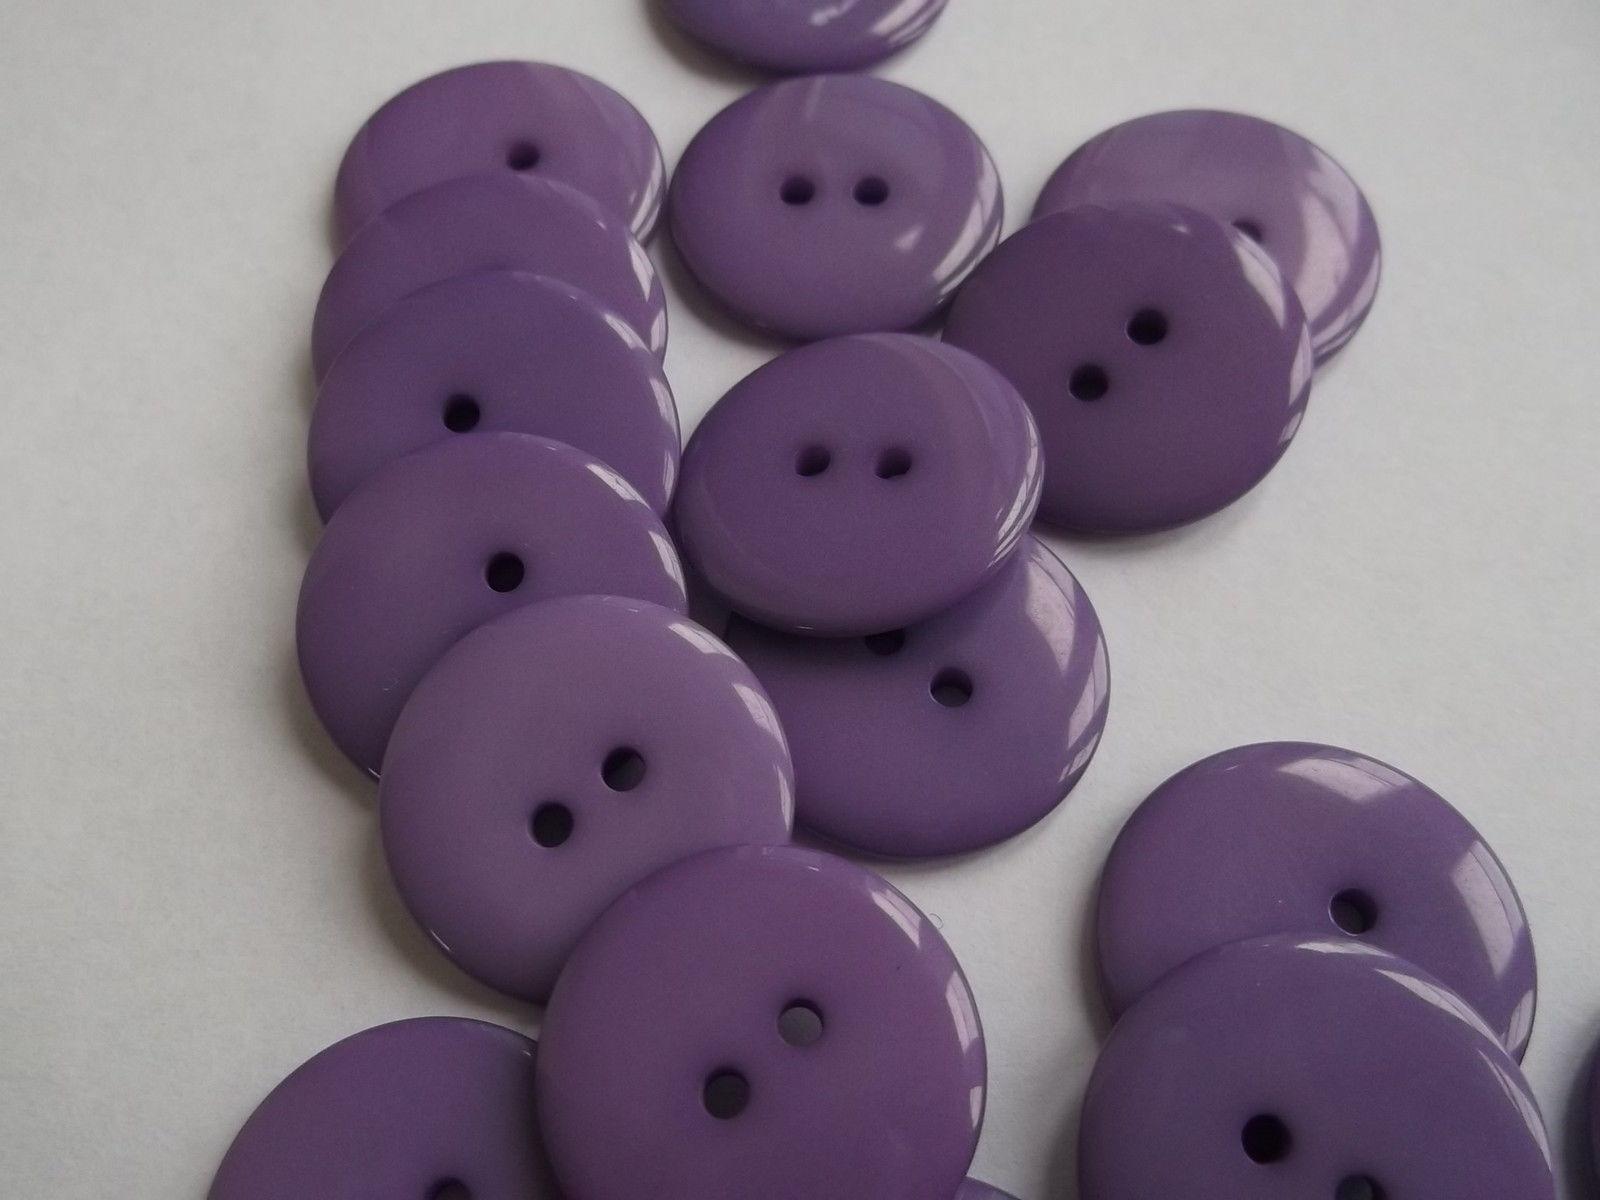 Purple 23mm round large resin sewing buttons